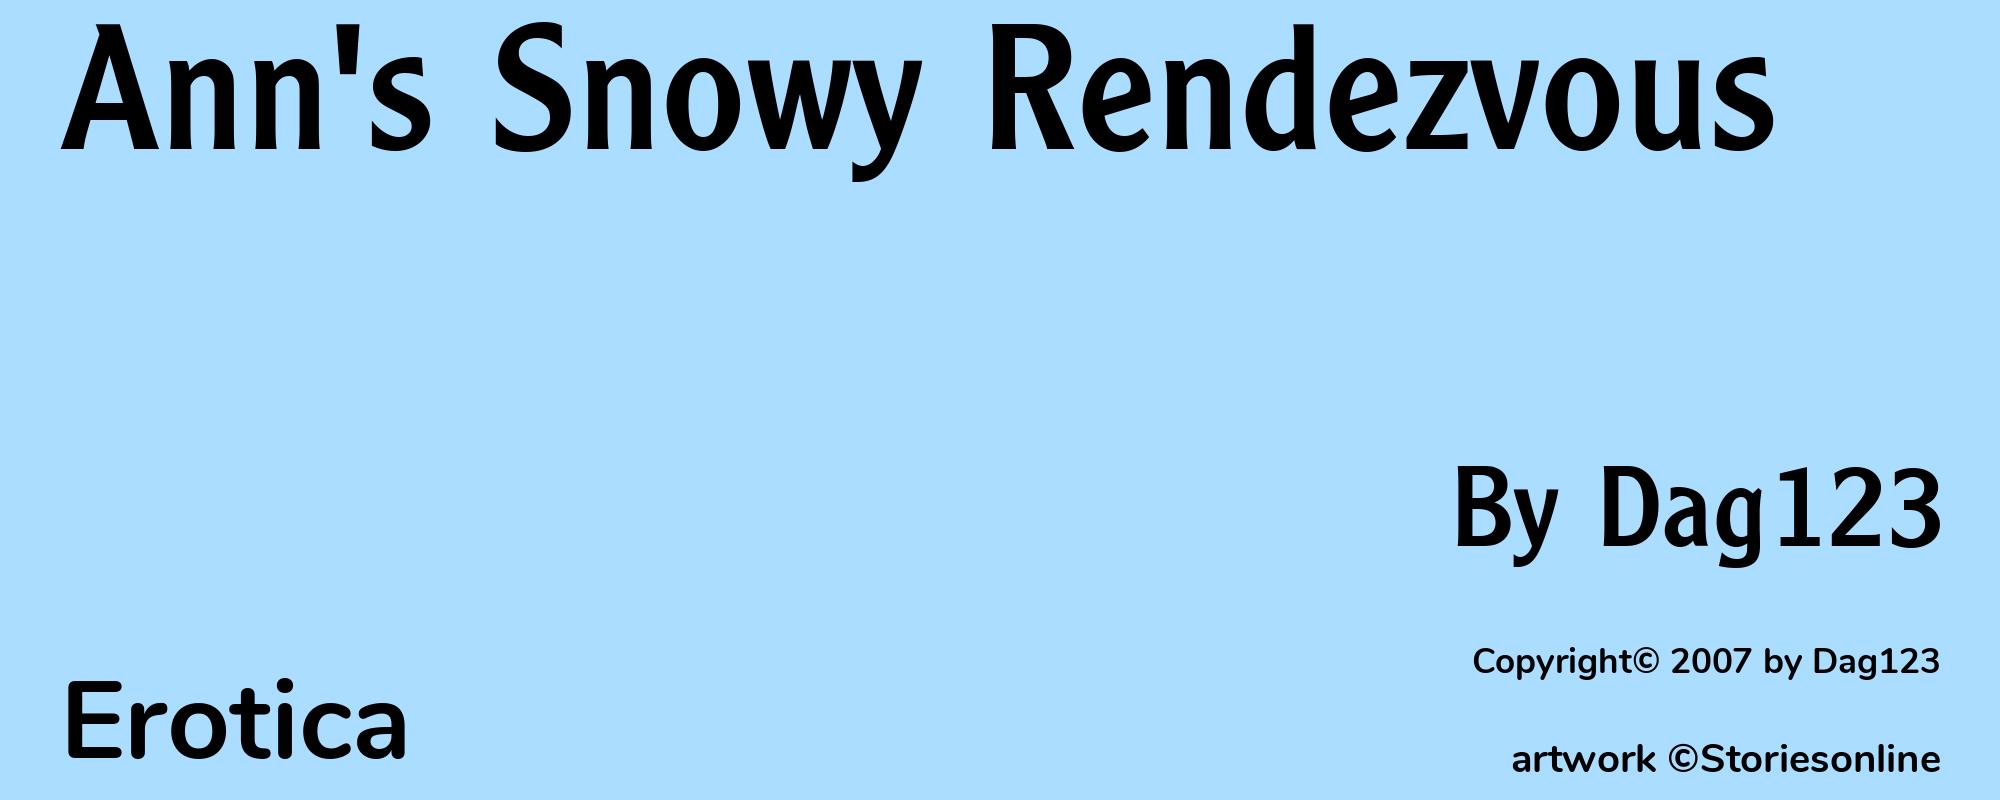 Ann's Snowy Rendezvous - Cover